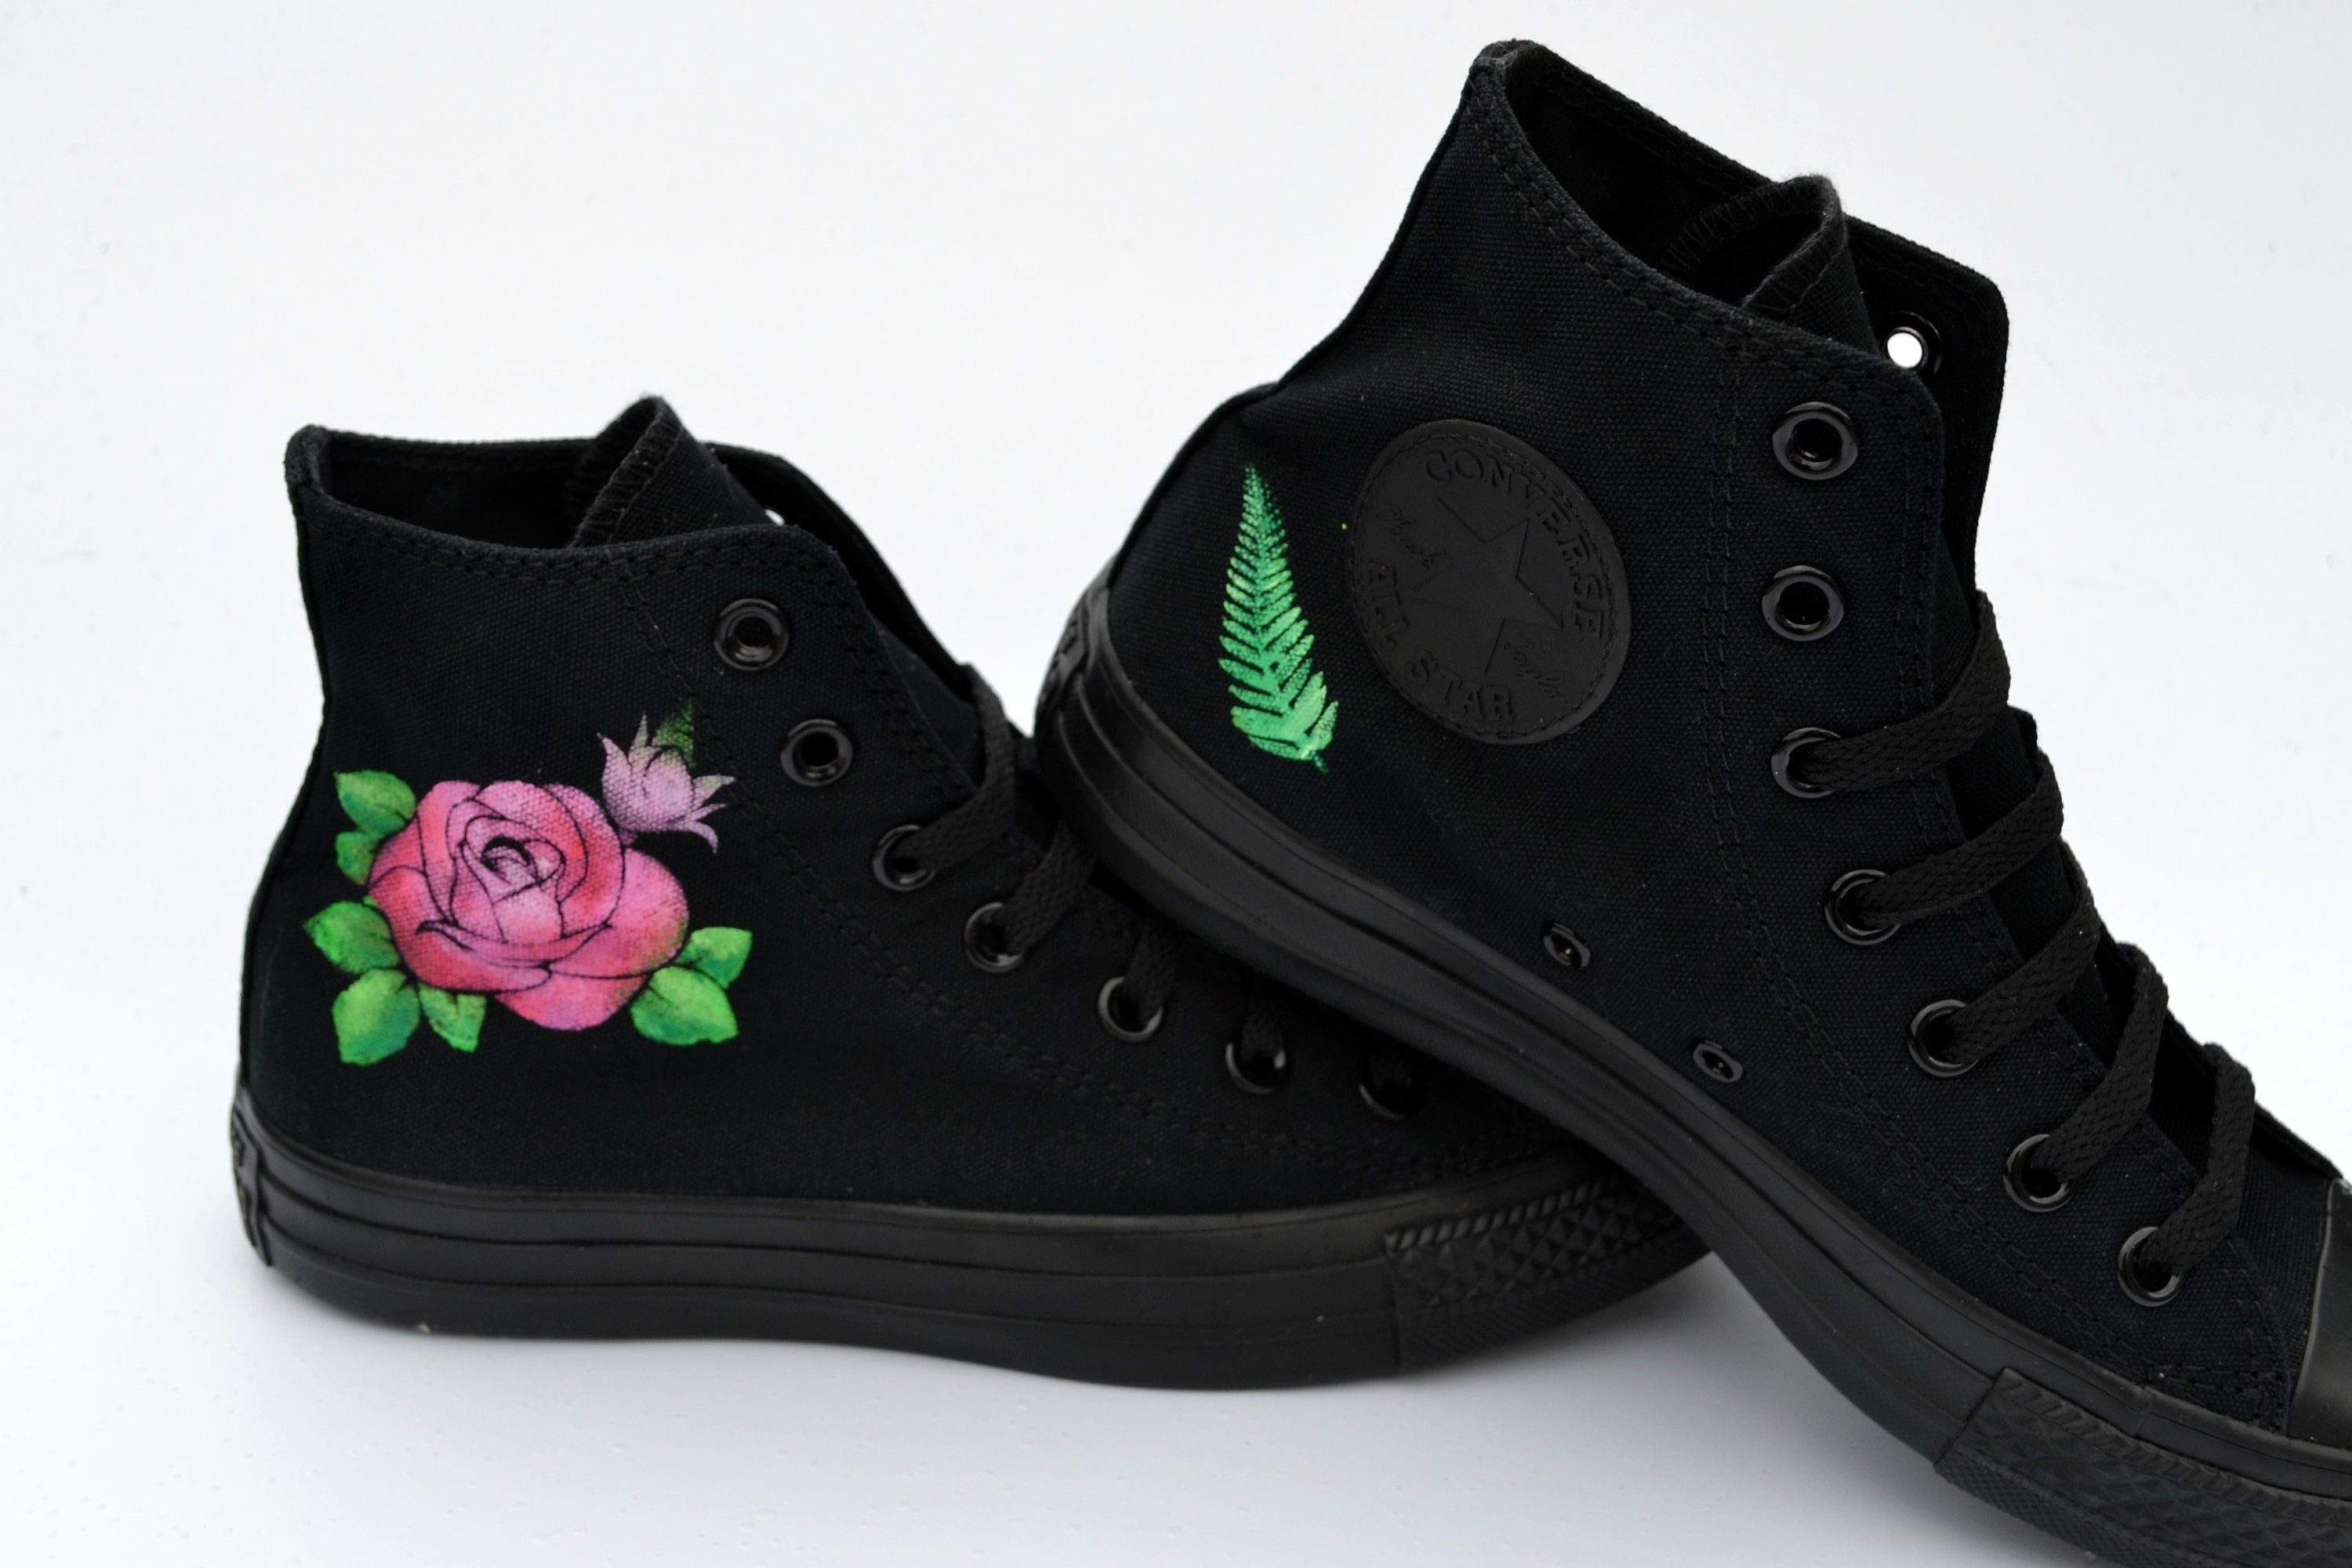 Converse Rose Hi Floral Sneakers Hand Painted